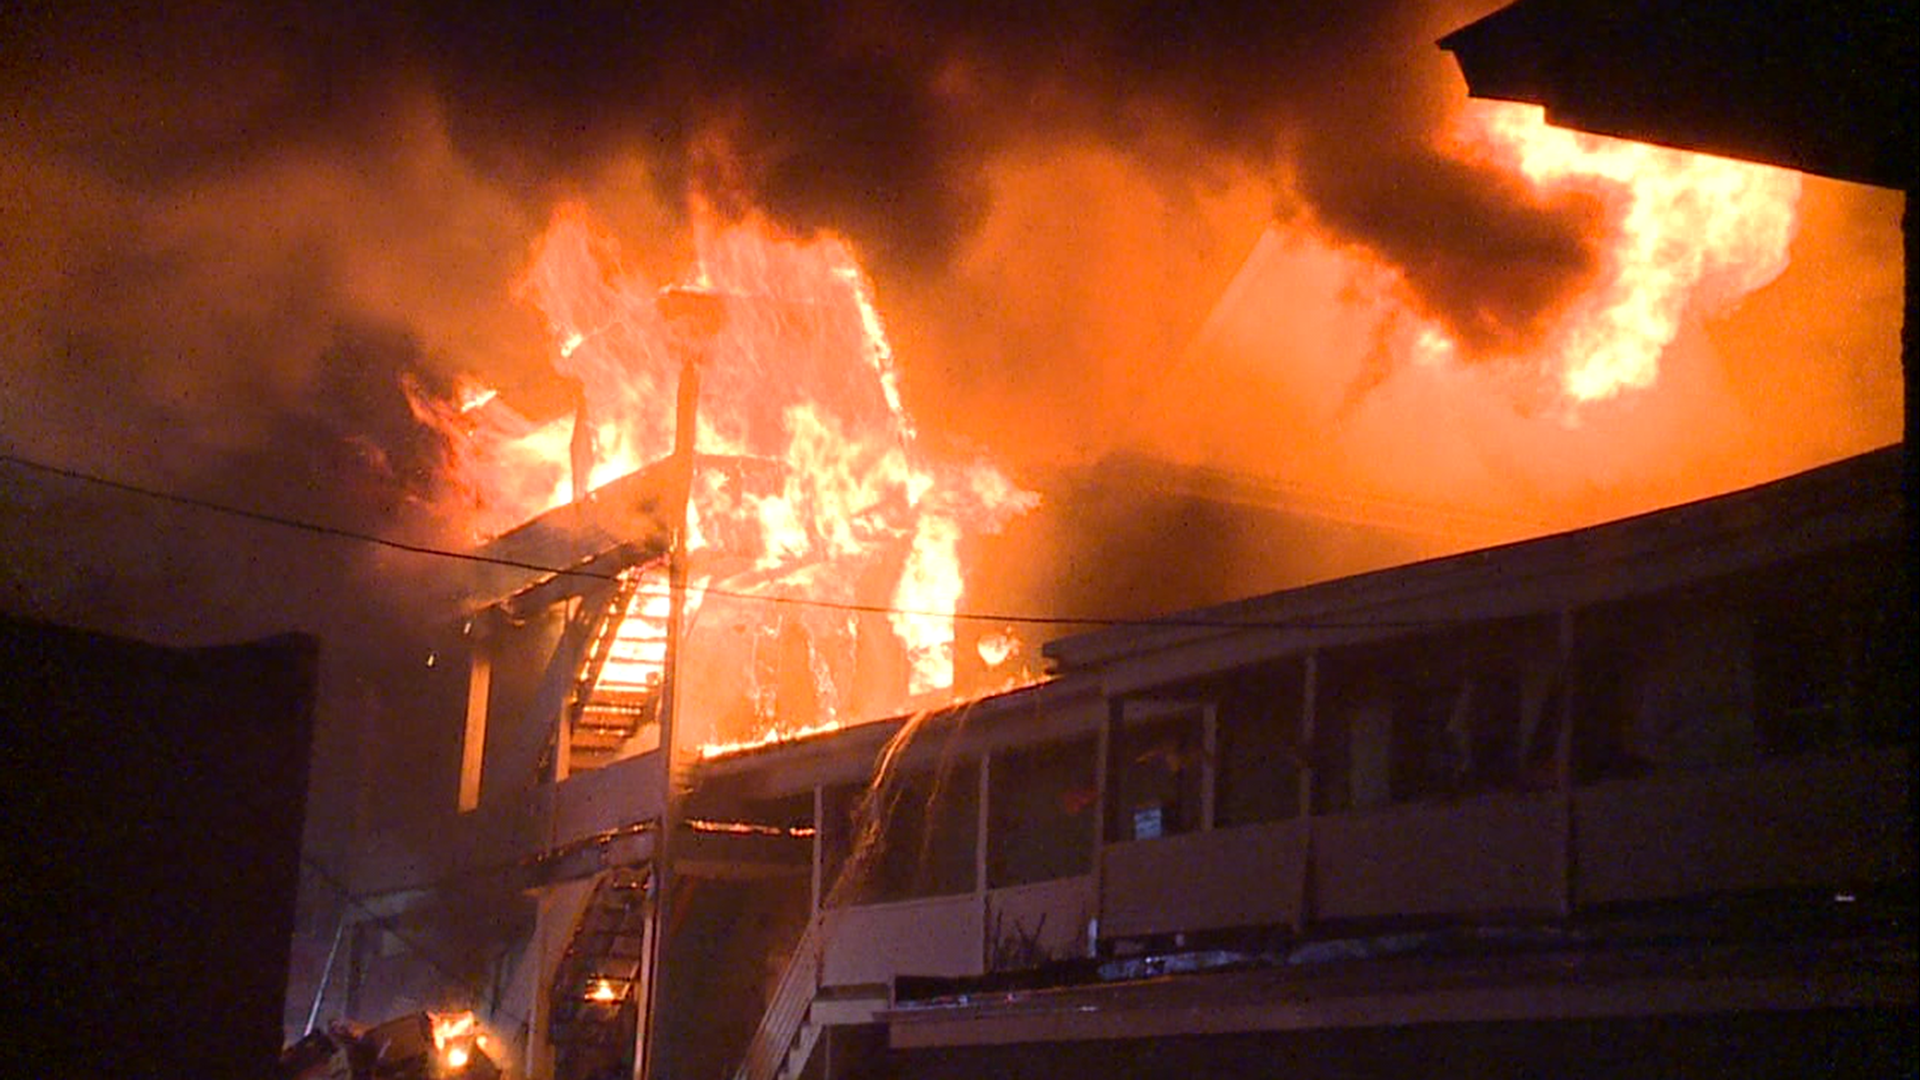 Investigators were unable to determine the cause of the blaze that killed four people.